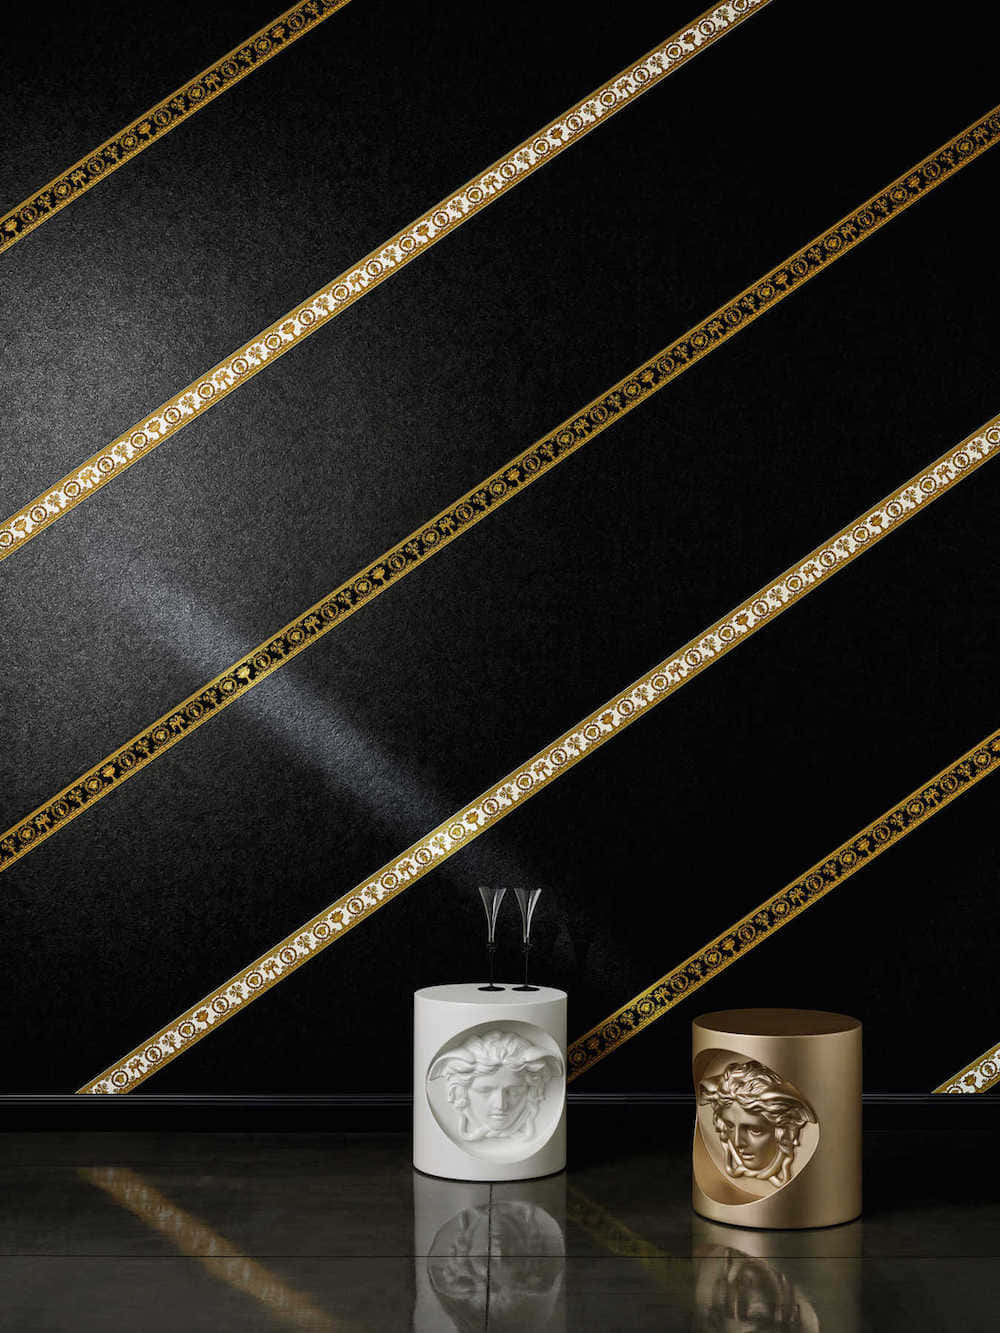 A Gold Vase And A Black Vase On A Black Wall